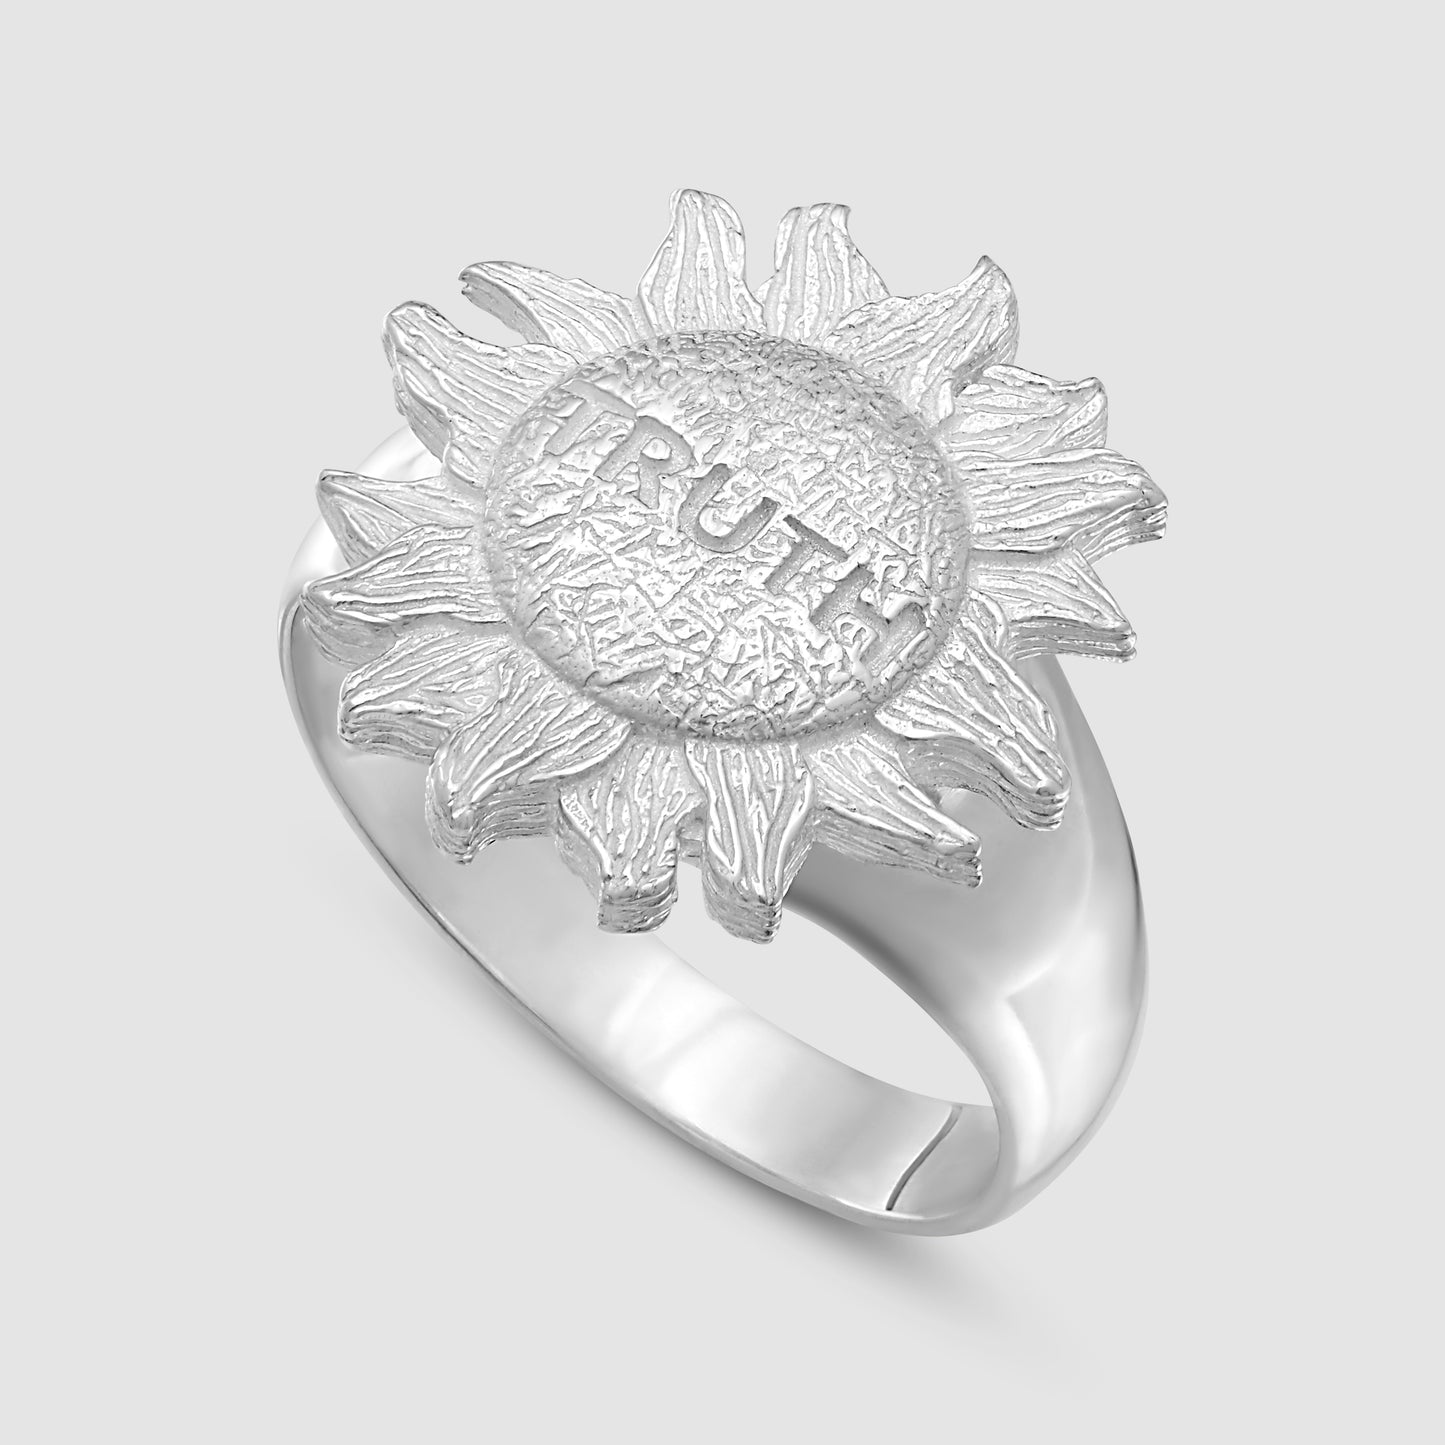 Truth is in the Sun Signet - Silver